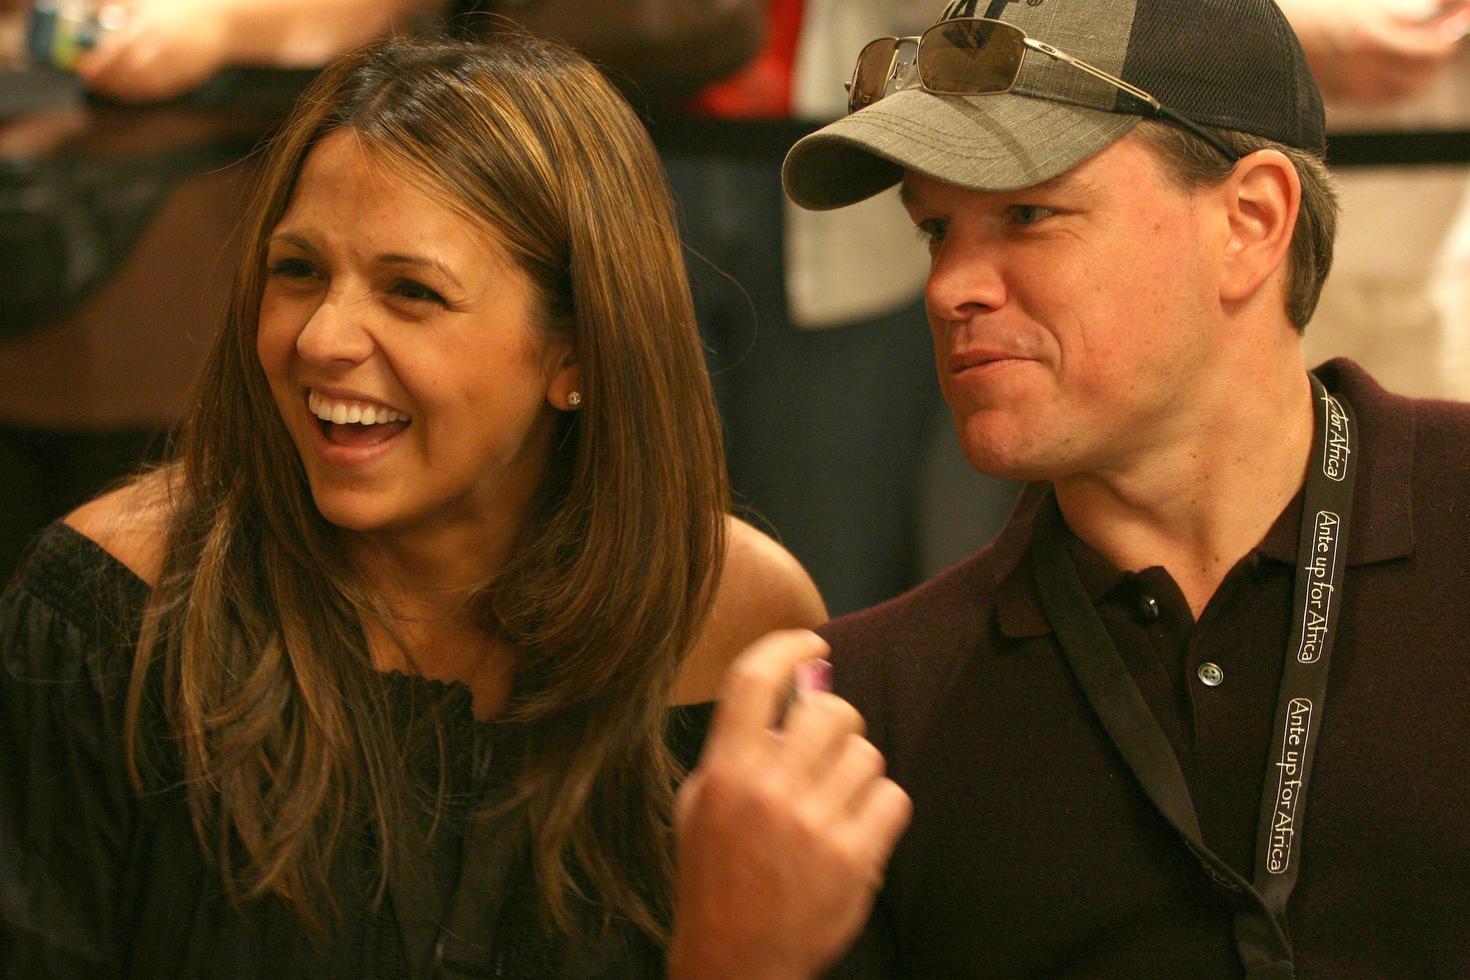 Matt Damon playing poker as his wife looks on at the Ante up for Africa Poker Tournament at the 2008 World Series of Poker, at the Rio All-Suite Hotel and Casino in
Las Vegas, NV
July 2, 2008
 2008 Kathy Hutchins Hutchins Photo